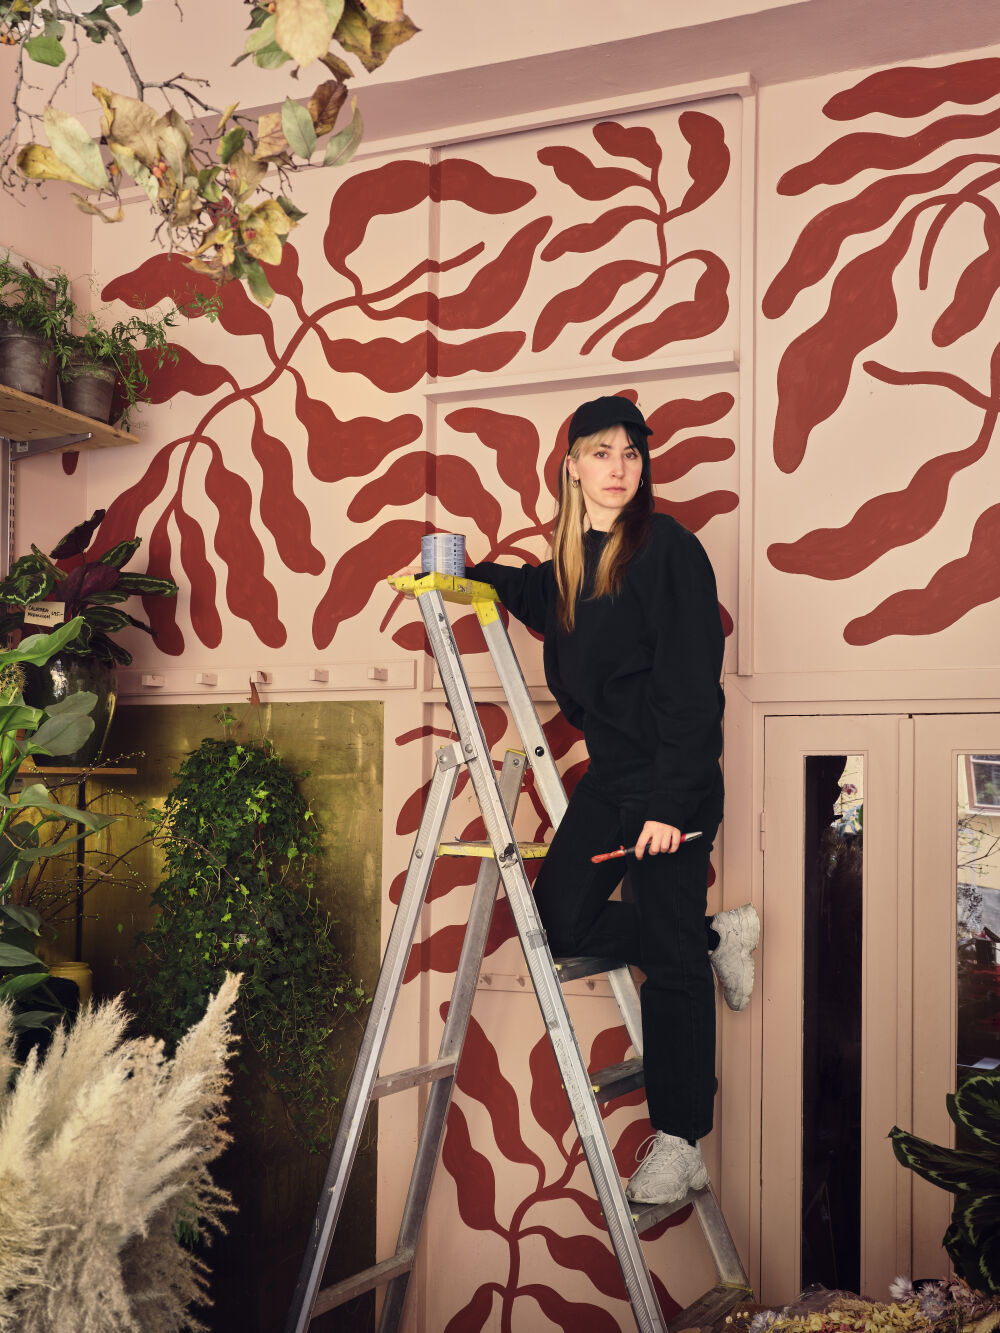 Handpainted wall mural by the contemporary artist and illustrator Linnéa Anderson